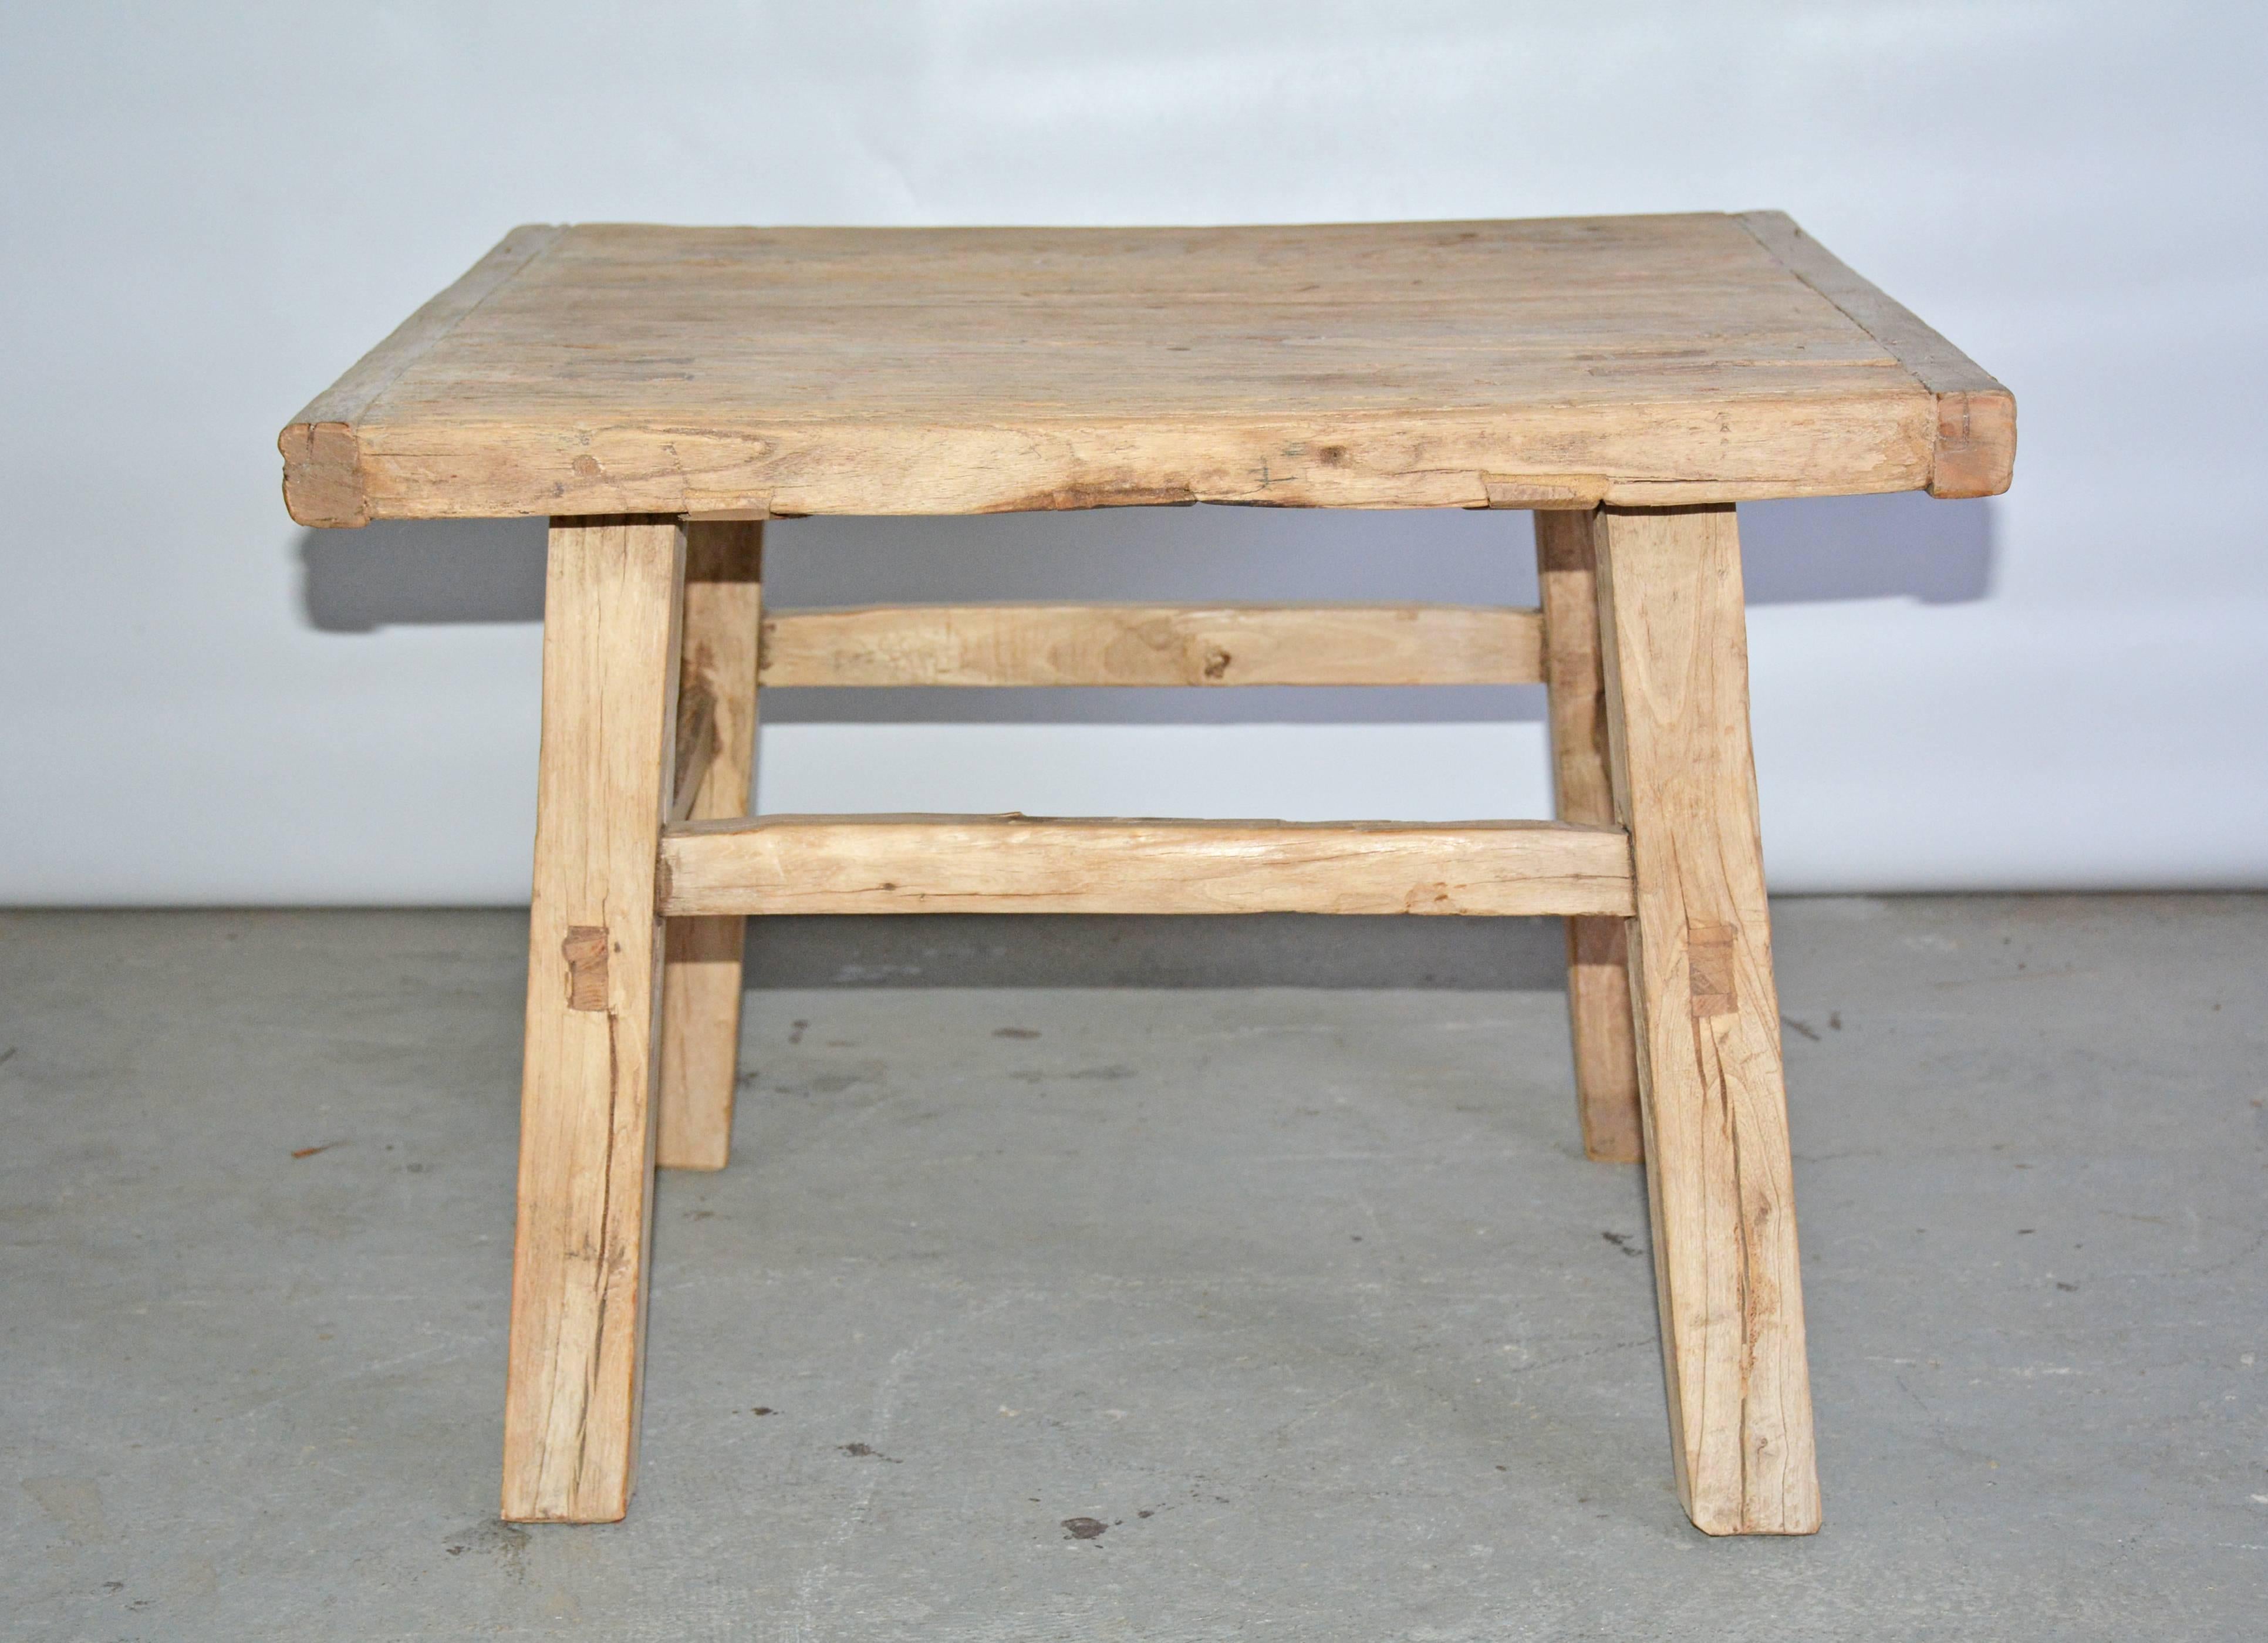 The rustic Swedish country style coffee table or end table in natural teak wood has bread board ends, splayed legs and stretchers for stability.